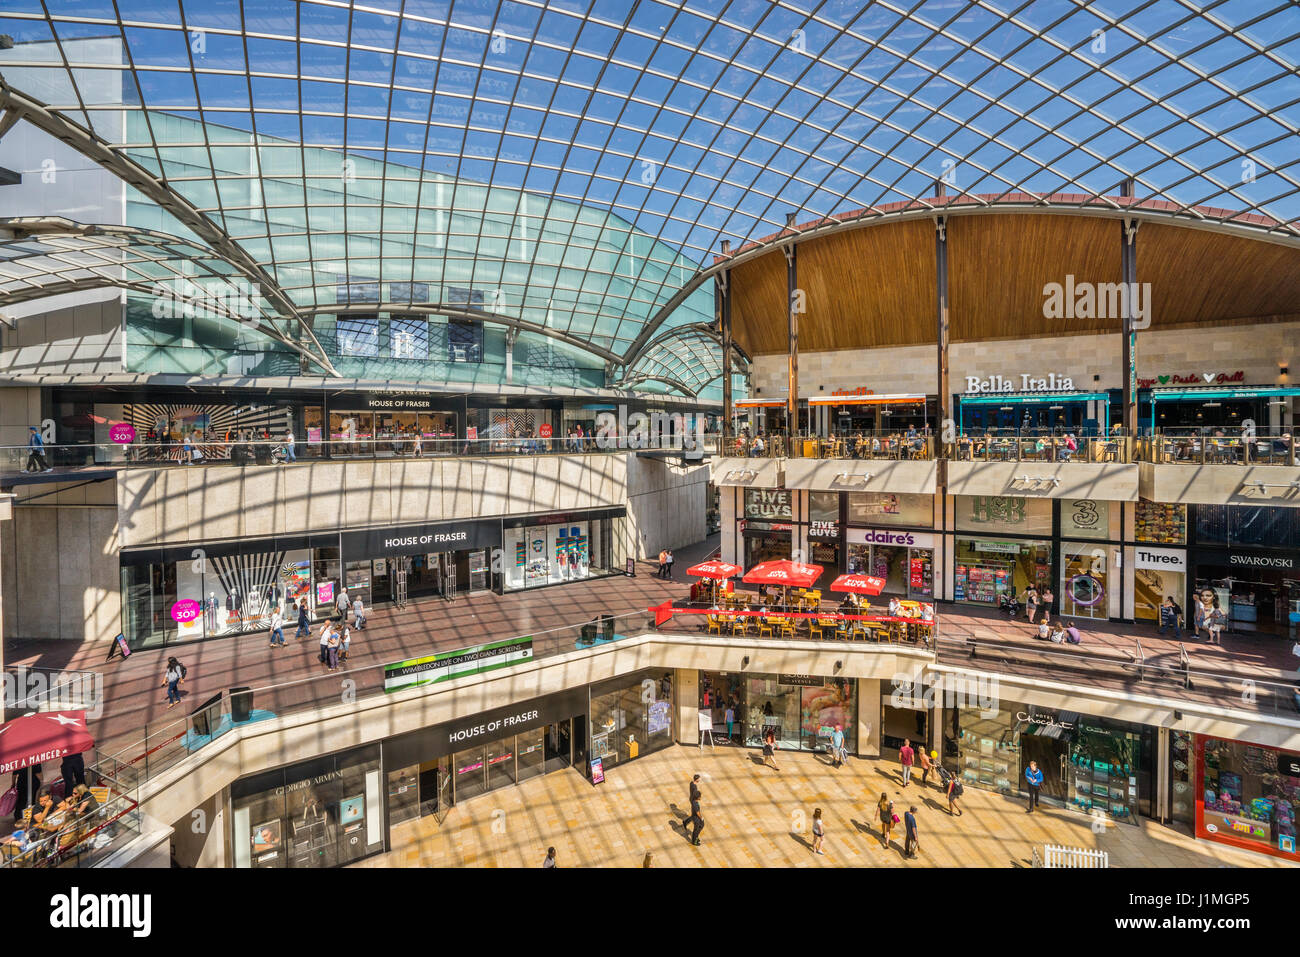 United Kingdom, South West England, Bristol, Cabot Circus Shopping Centre with enormous glas-panelled roof Stock Photo